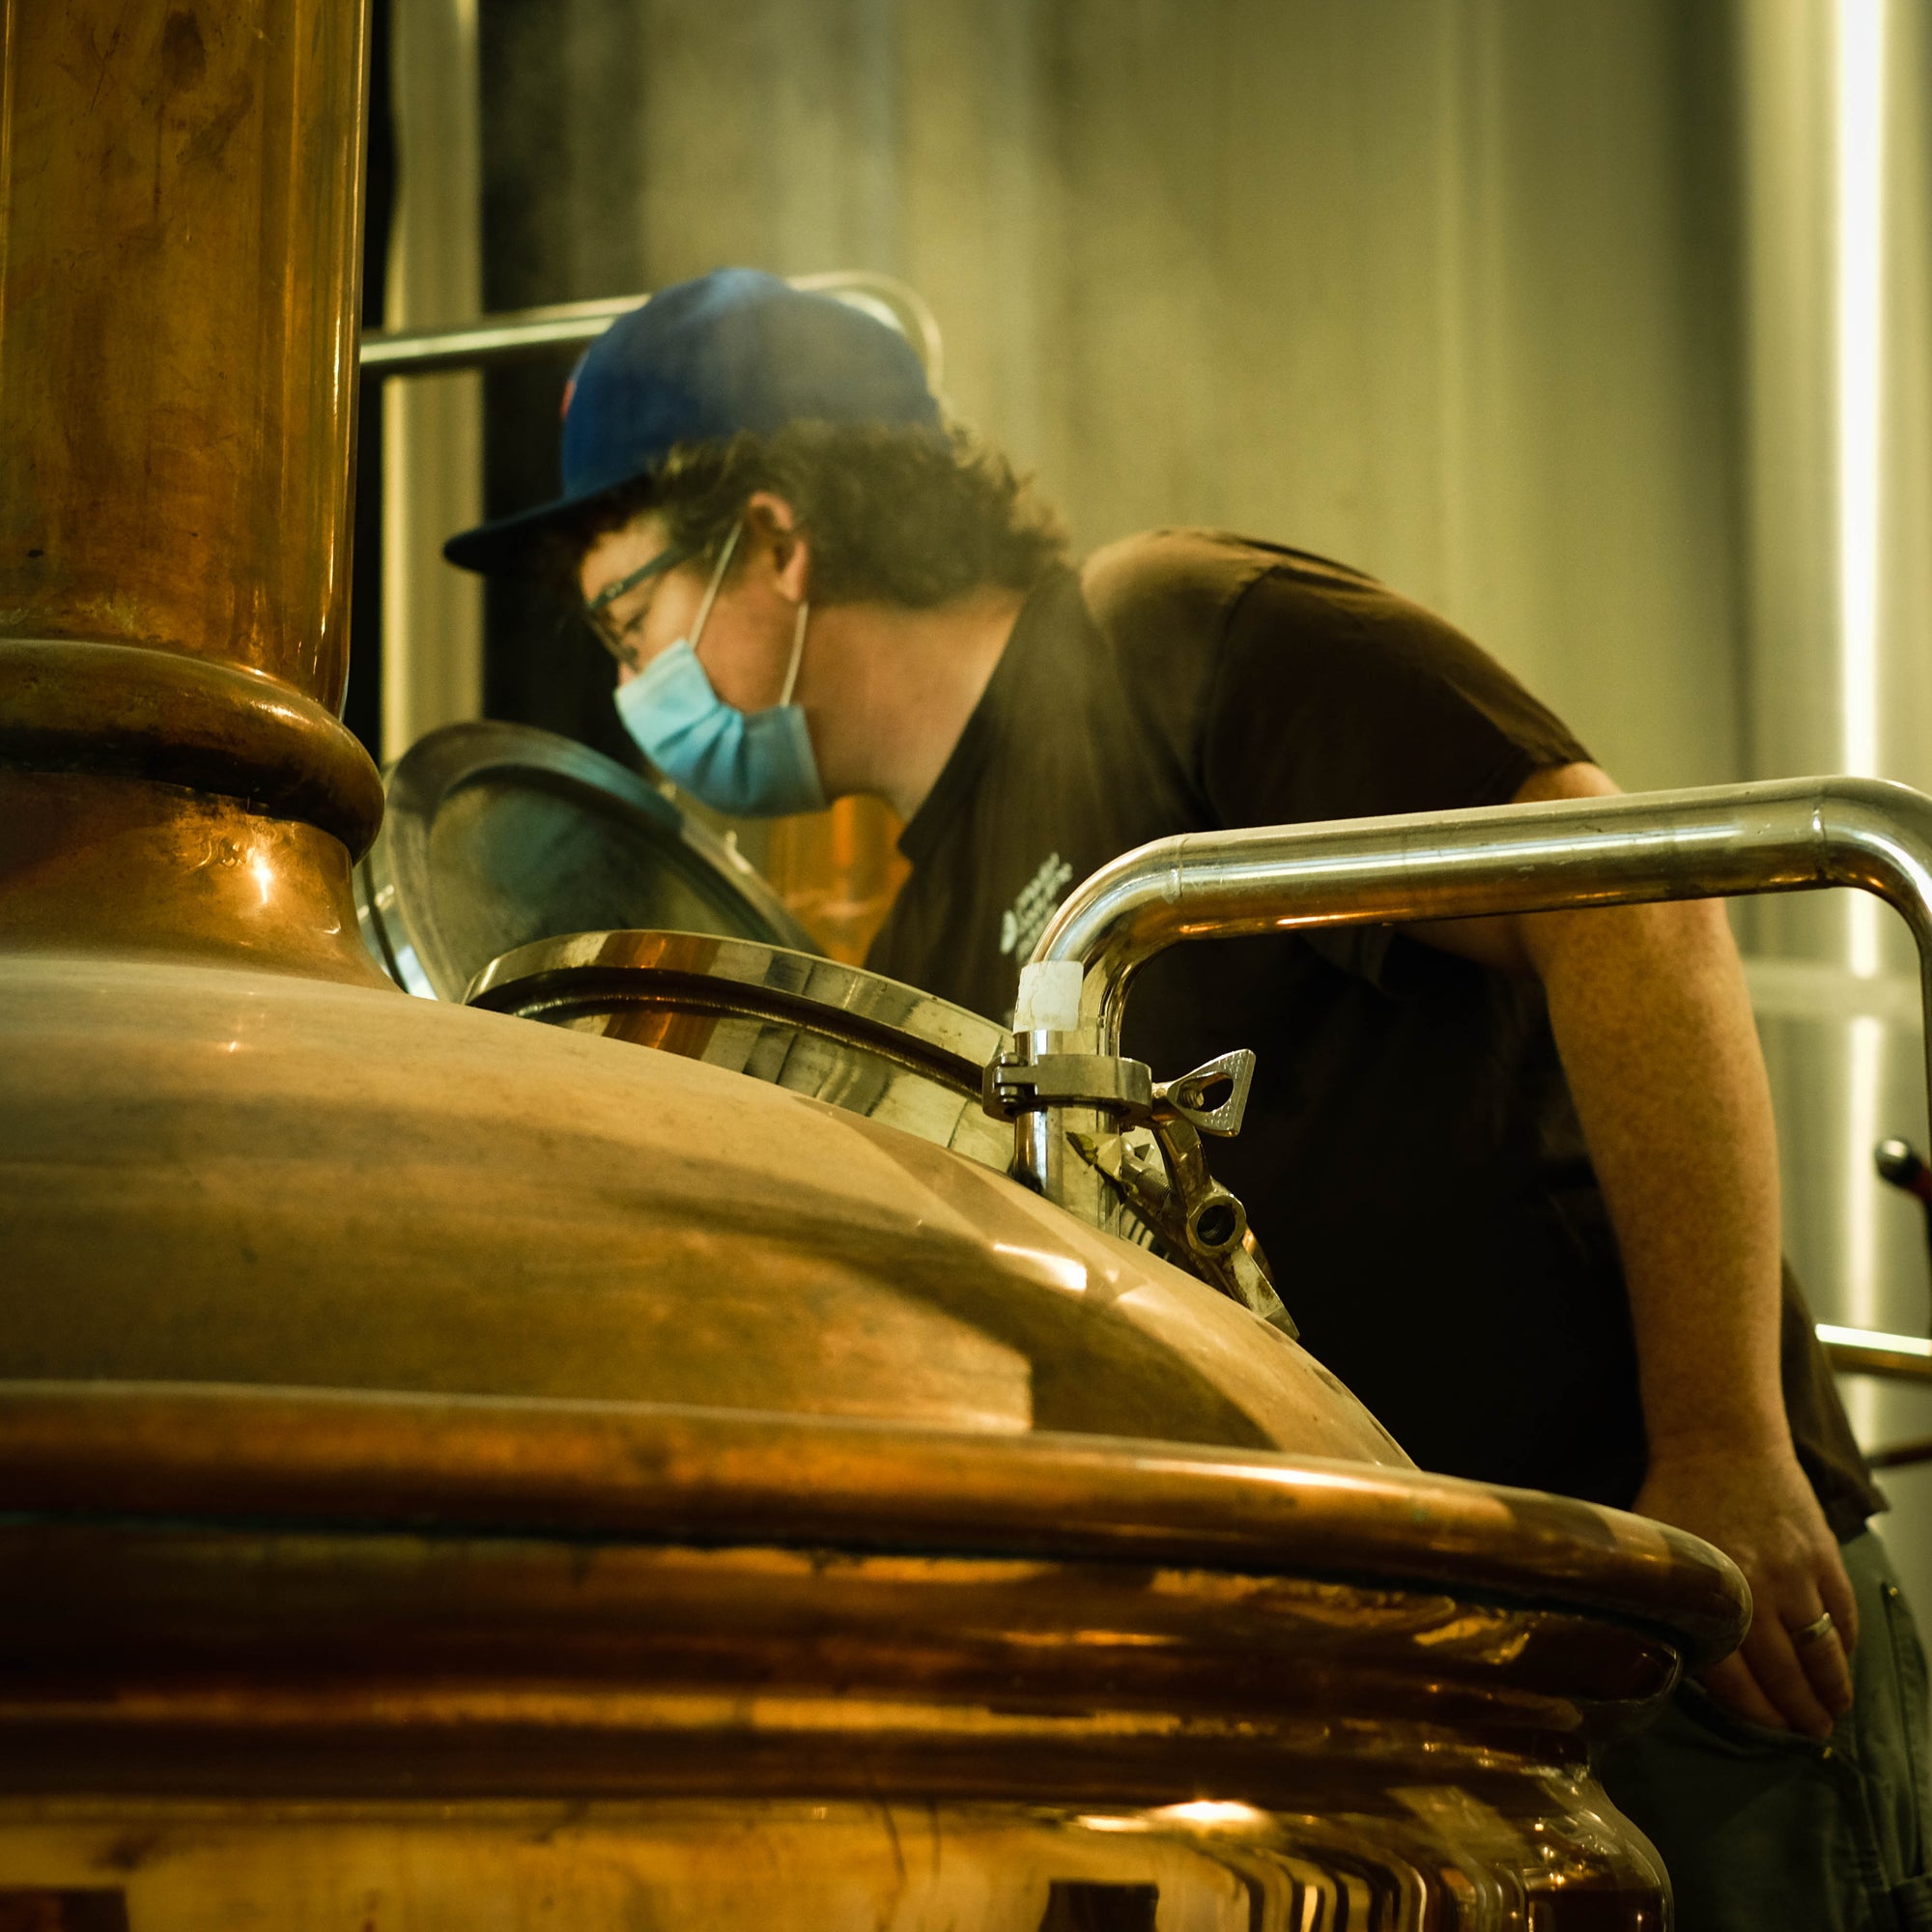 Brewmaster Rob Doyle Recalls the Question that Led to a Challenge